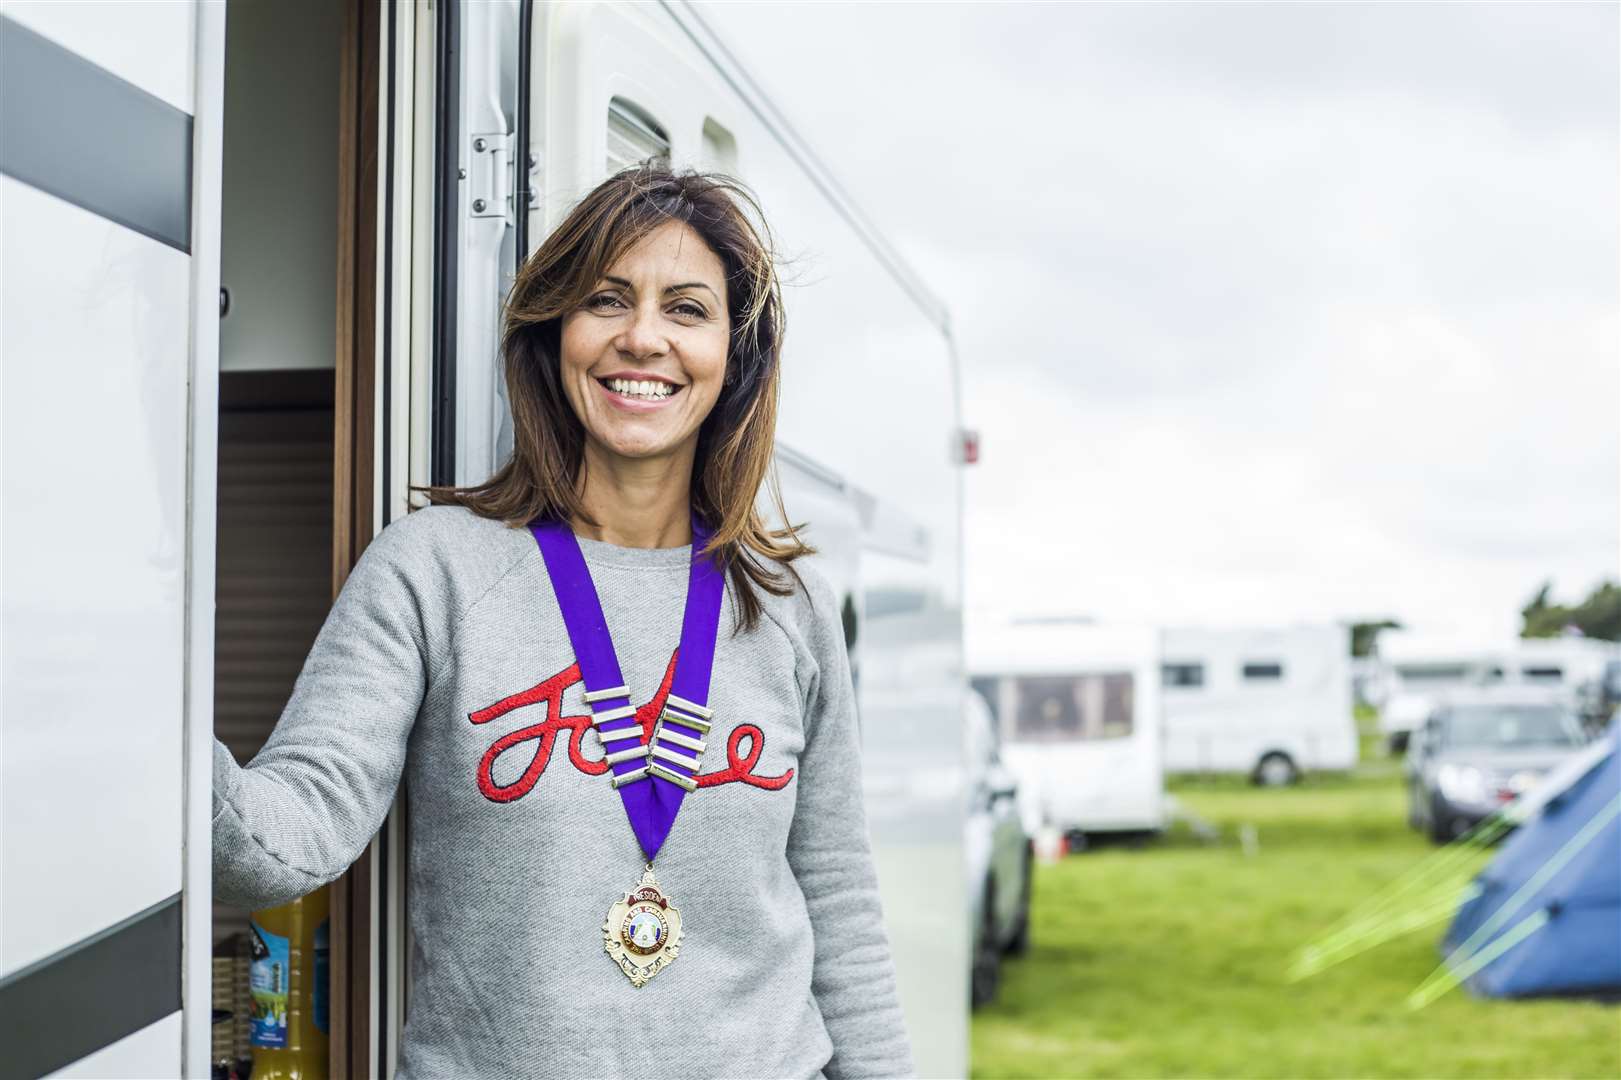 Julia Bradbury kicked things off in her garden Picture: Alisdair Cusick/ The Camping and Caravanning Club